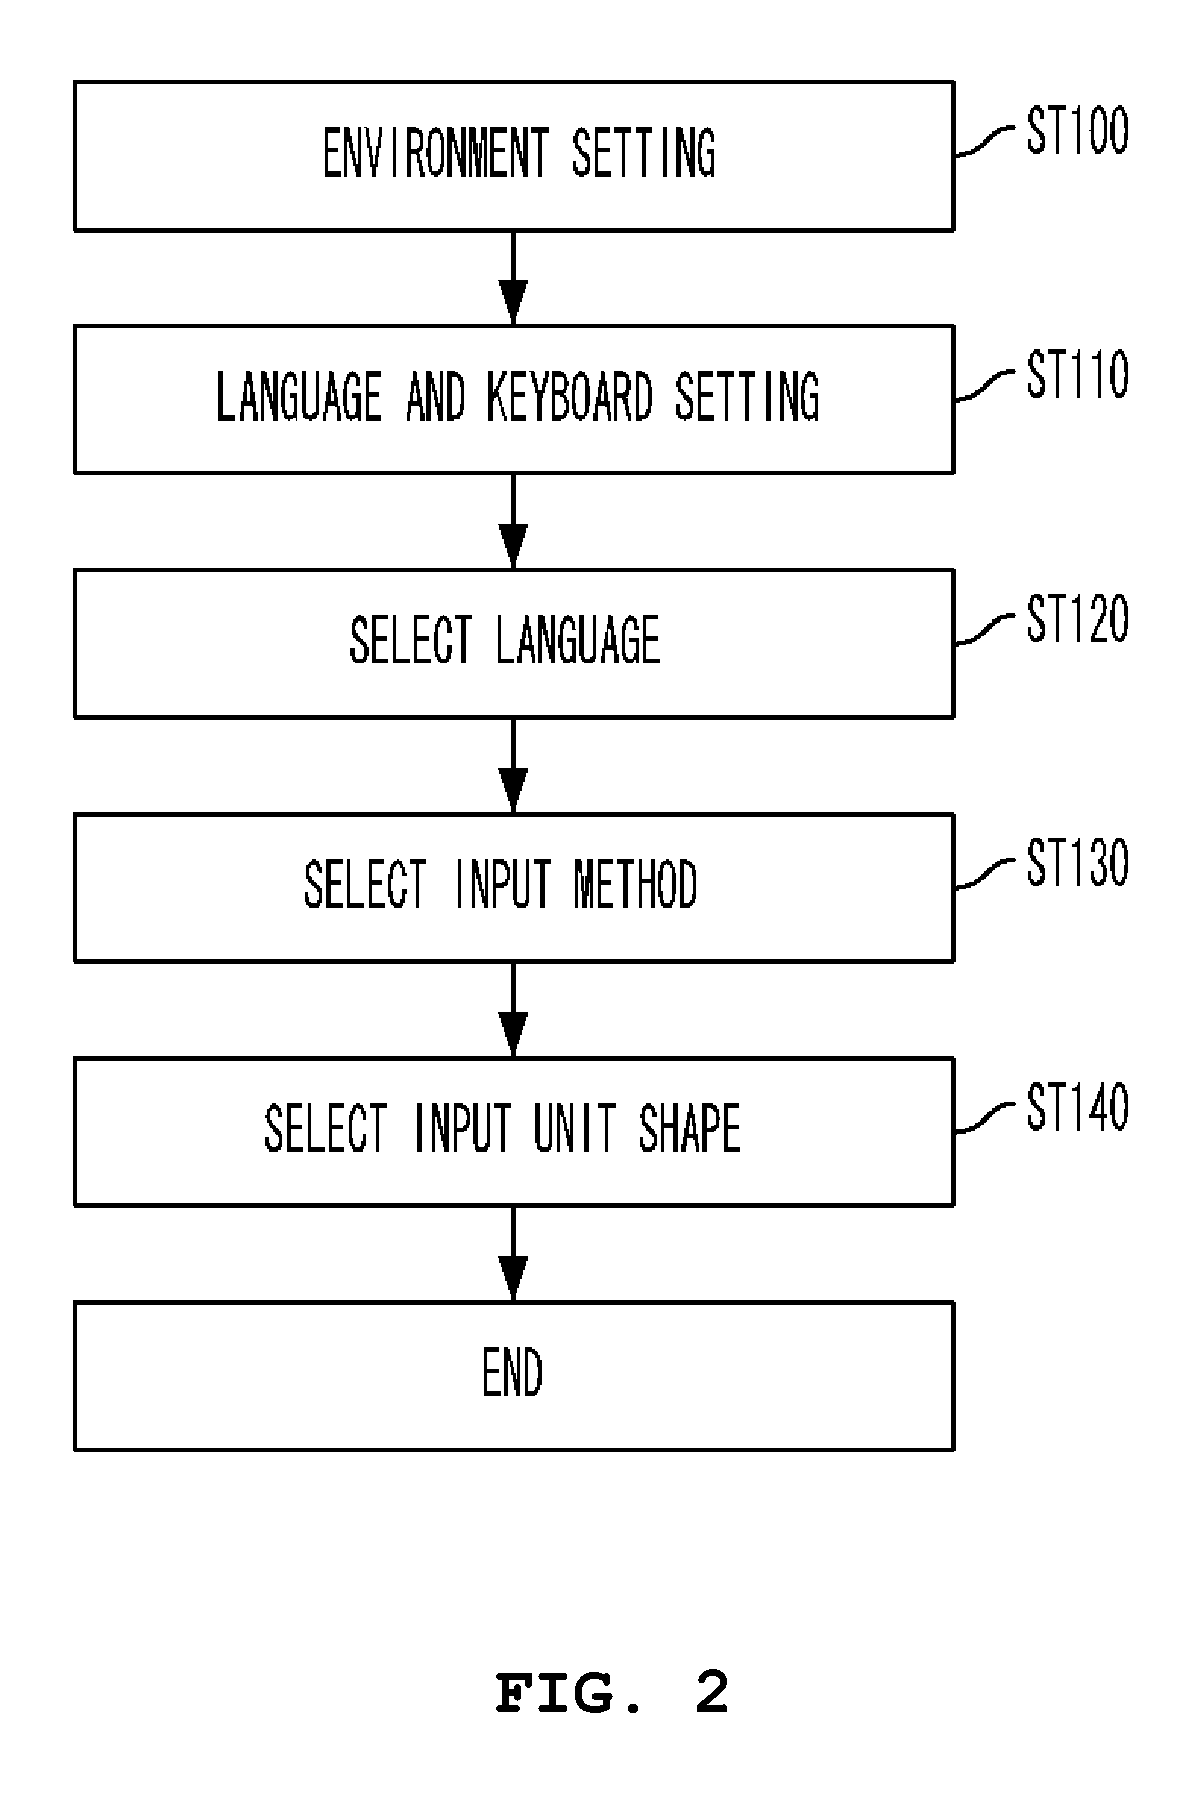 Method and system for providing background contents of virtual key input device